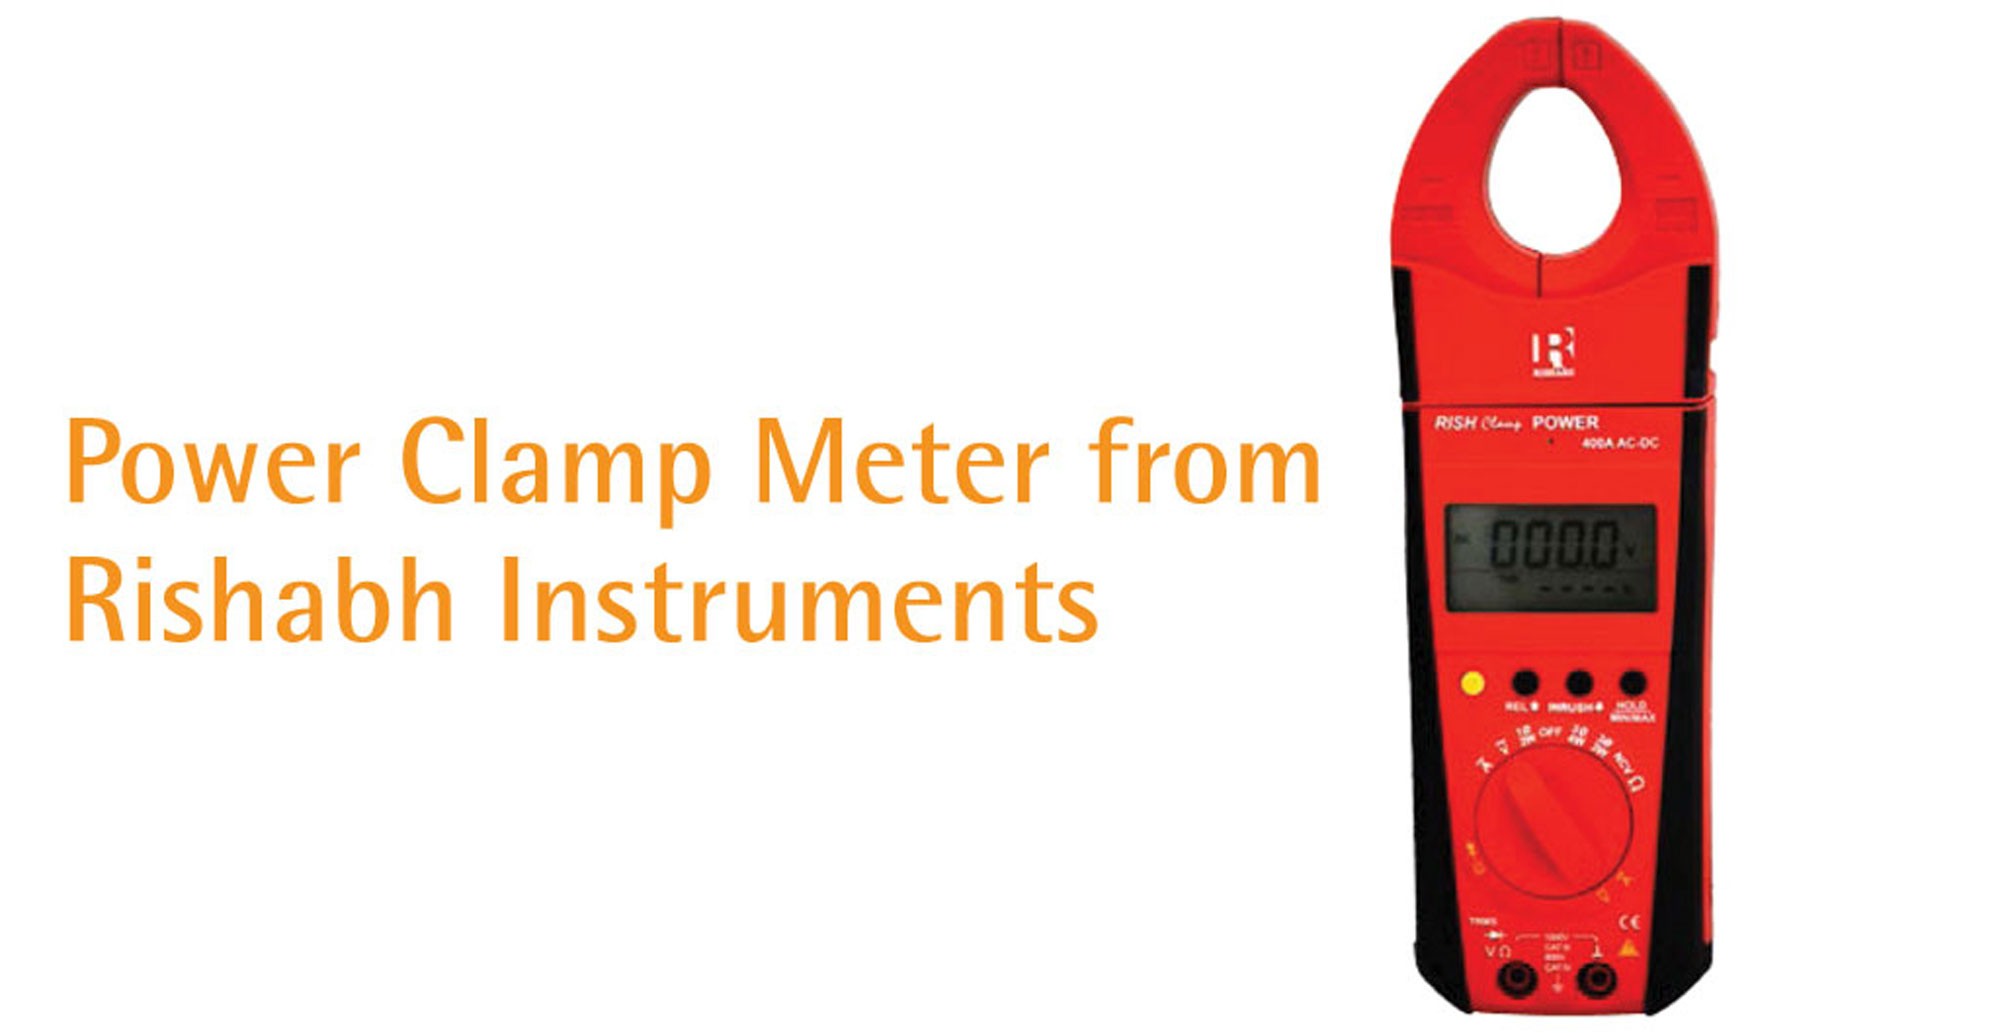 Power Clamp Meter from Rishabh Instruments